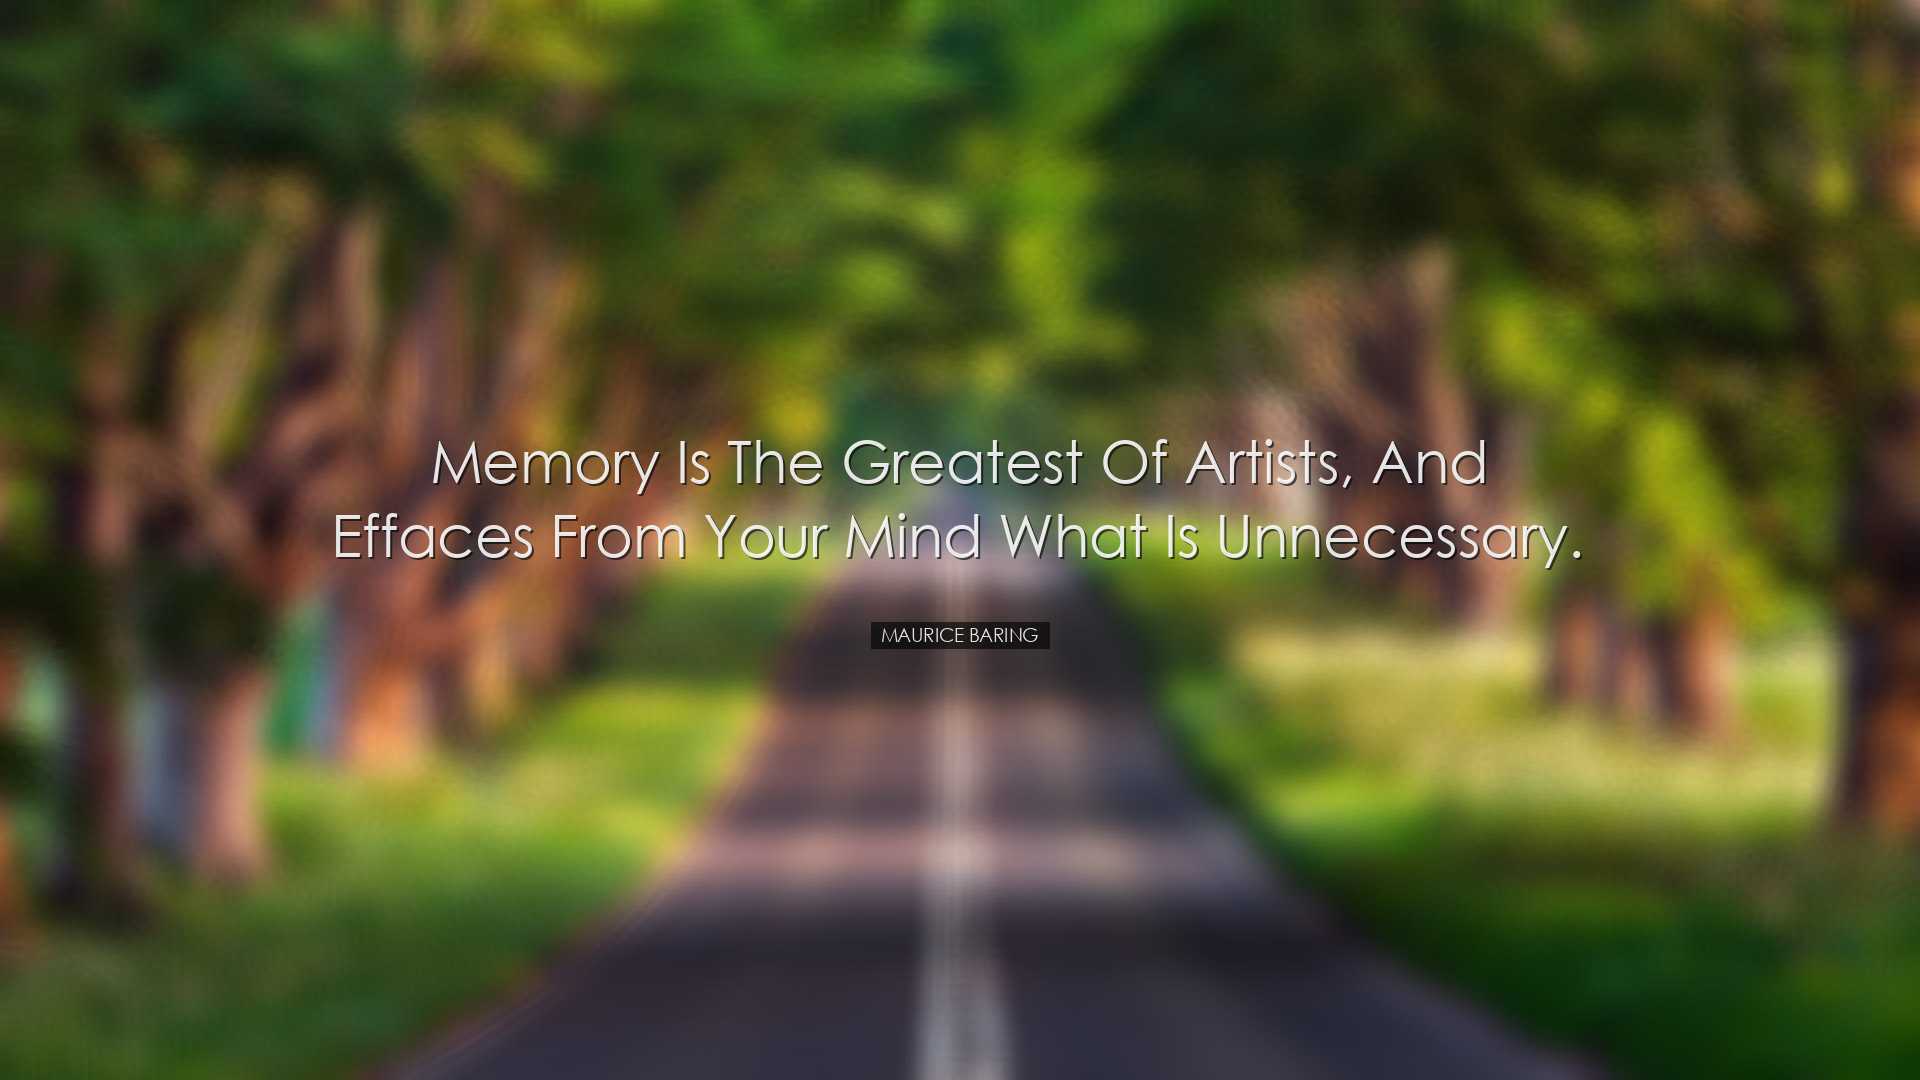 Memory is the greatest of artists, and effaces from your mind what